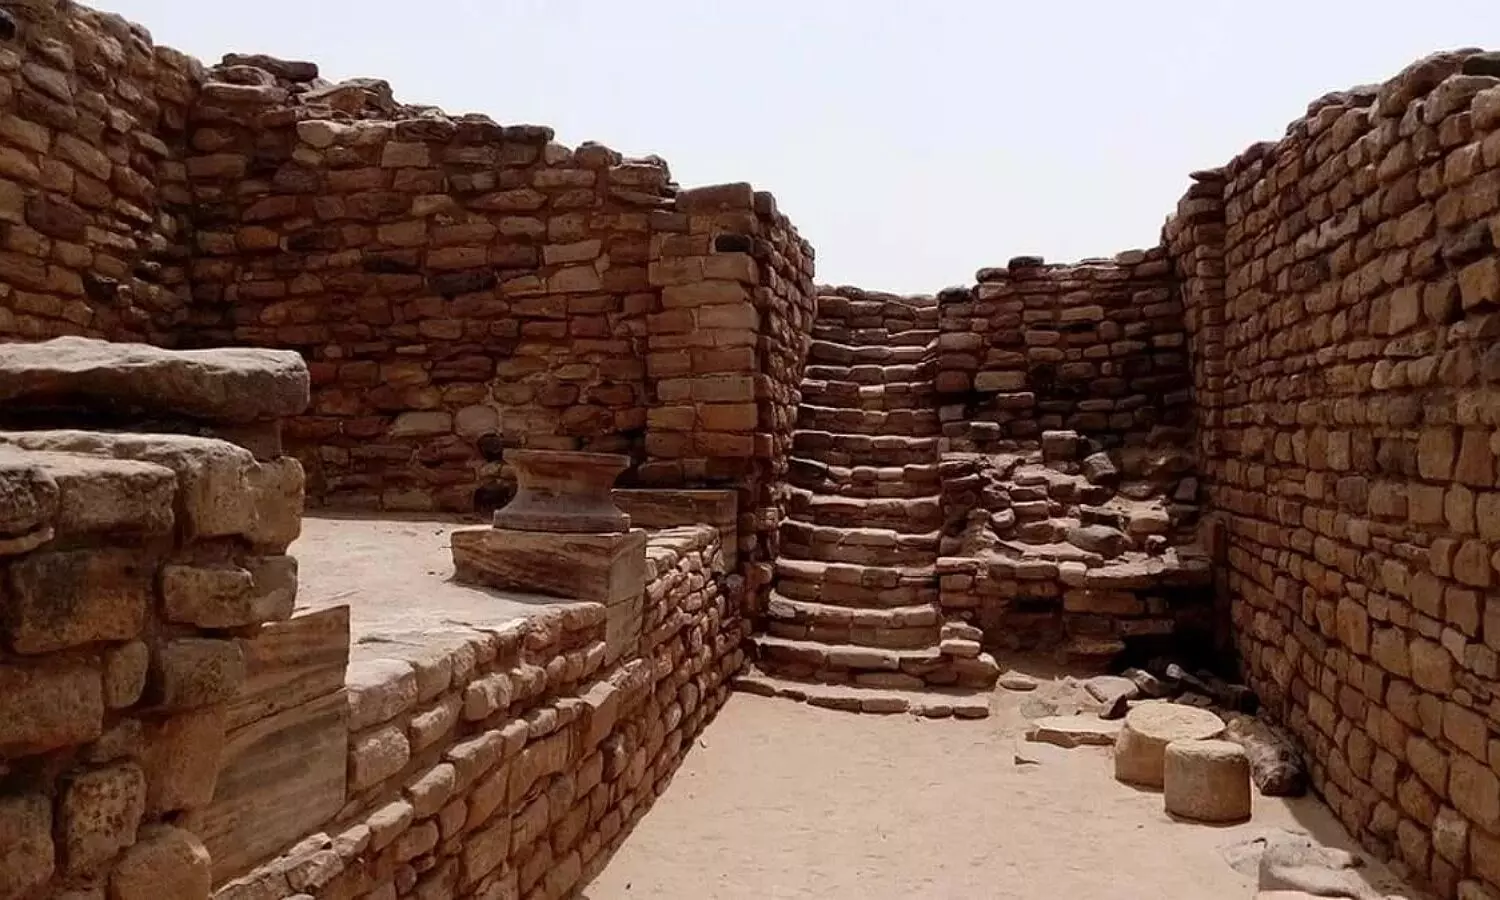 Dholavira of Gujarat included in the list of UNESCO World Heritage